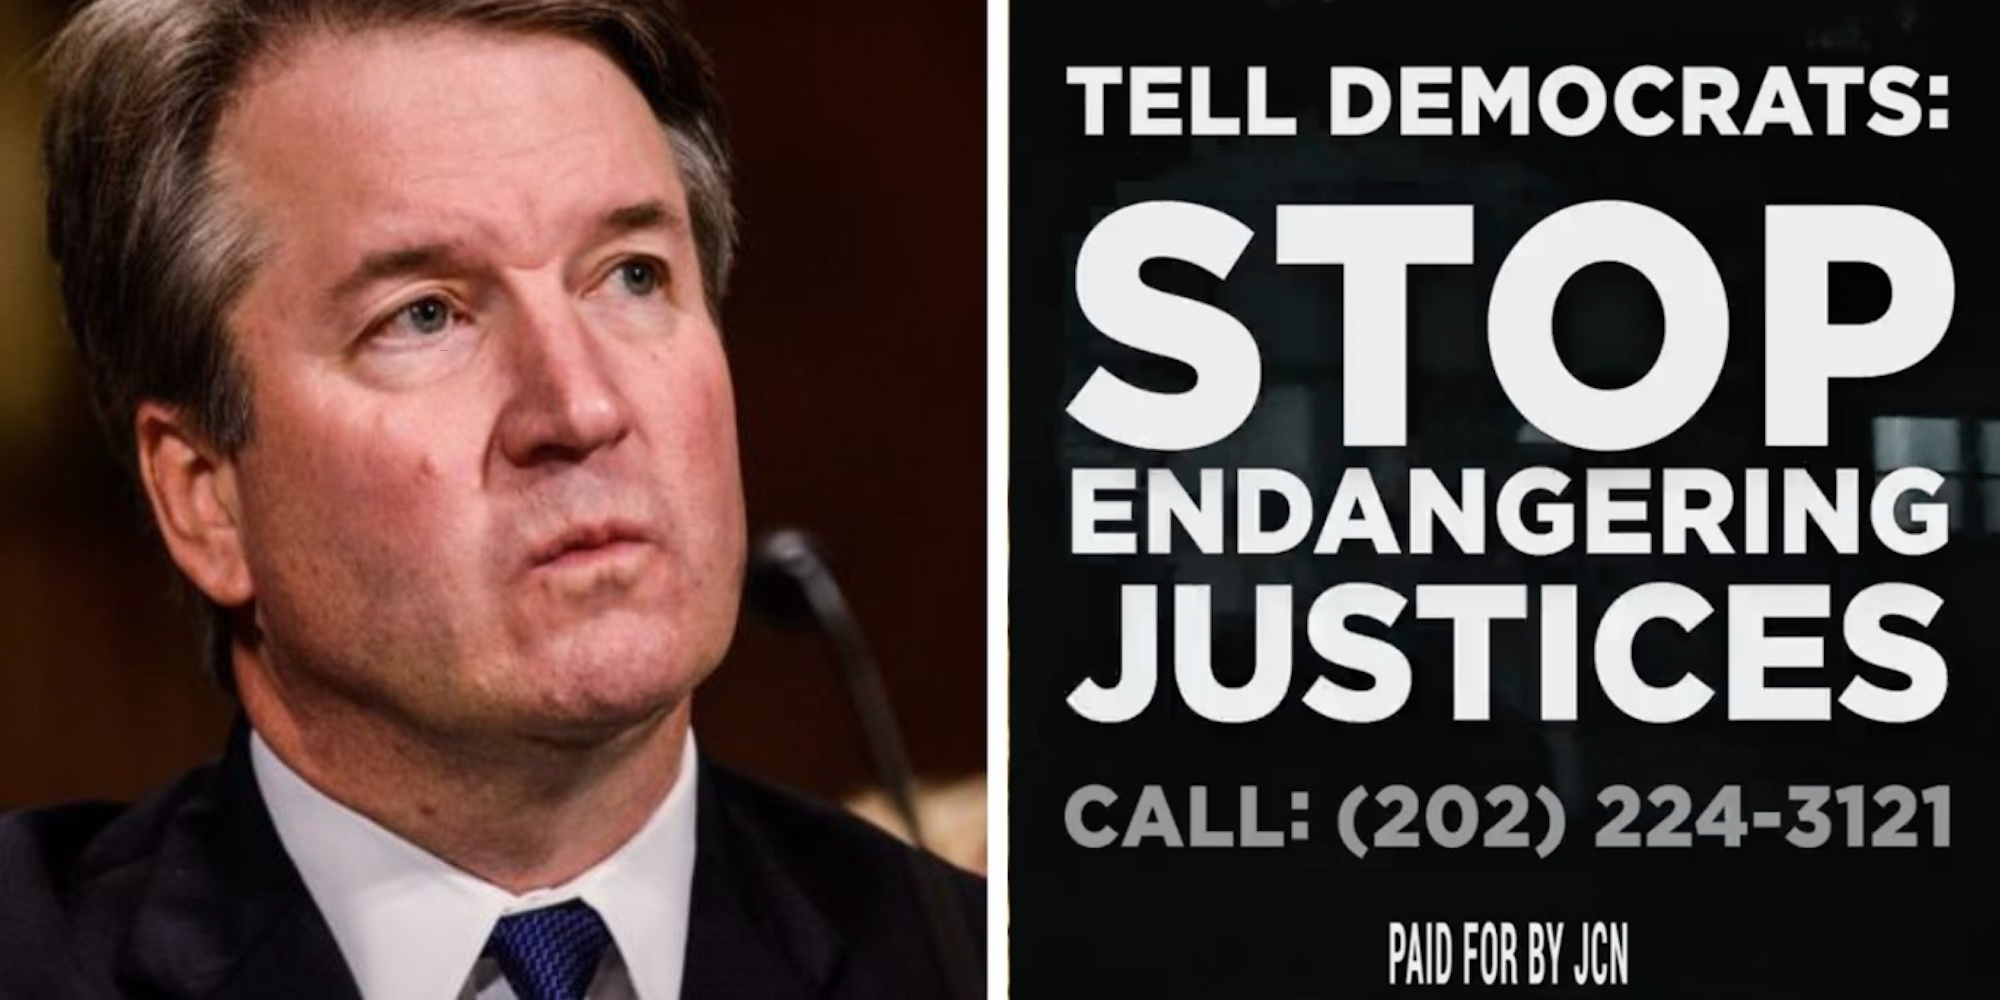 Judicial advocacy group releases ad slamming Dems over 'Liberal Gunman's' attempt to assassinate Kavanaugh